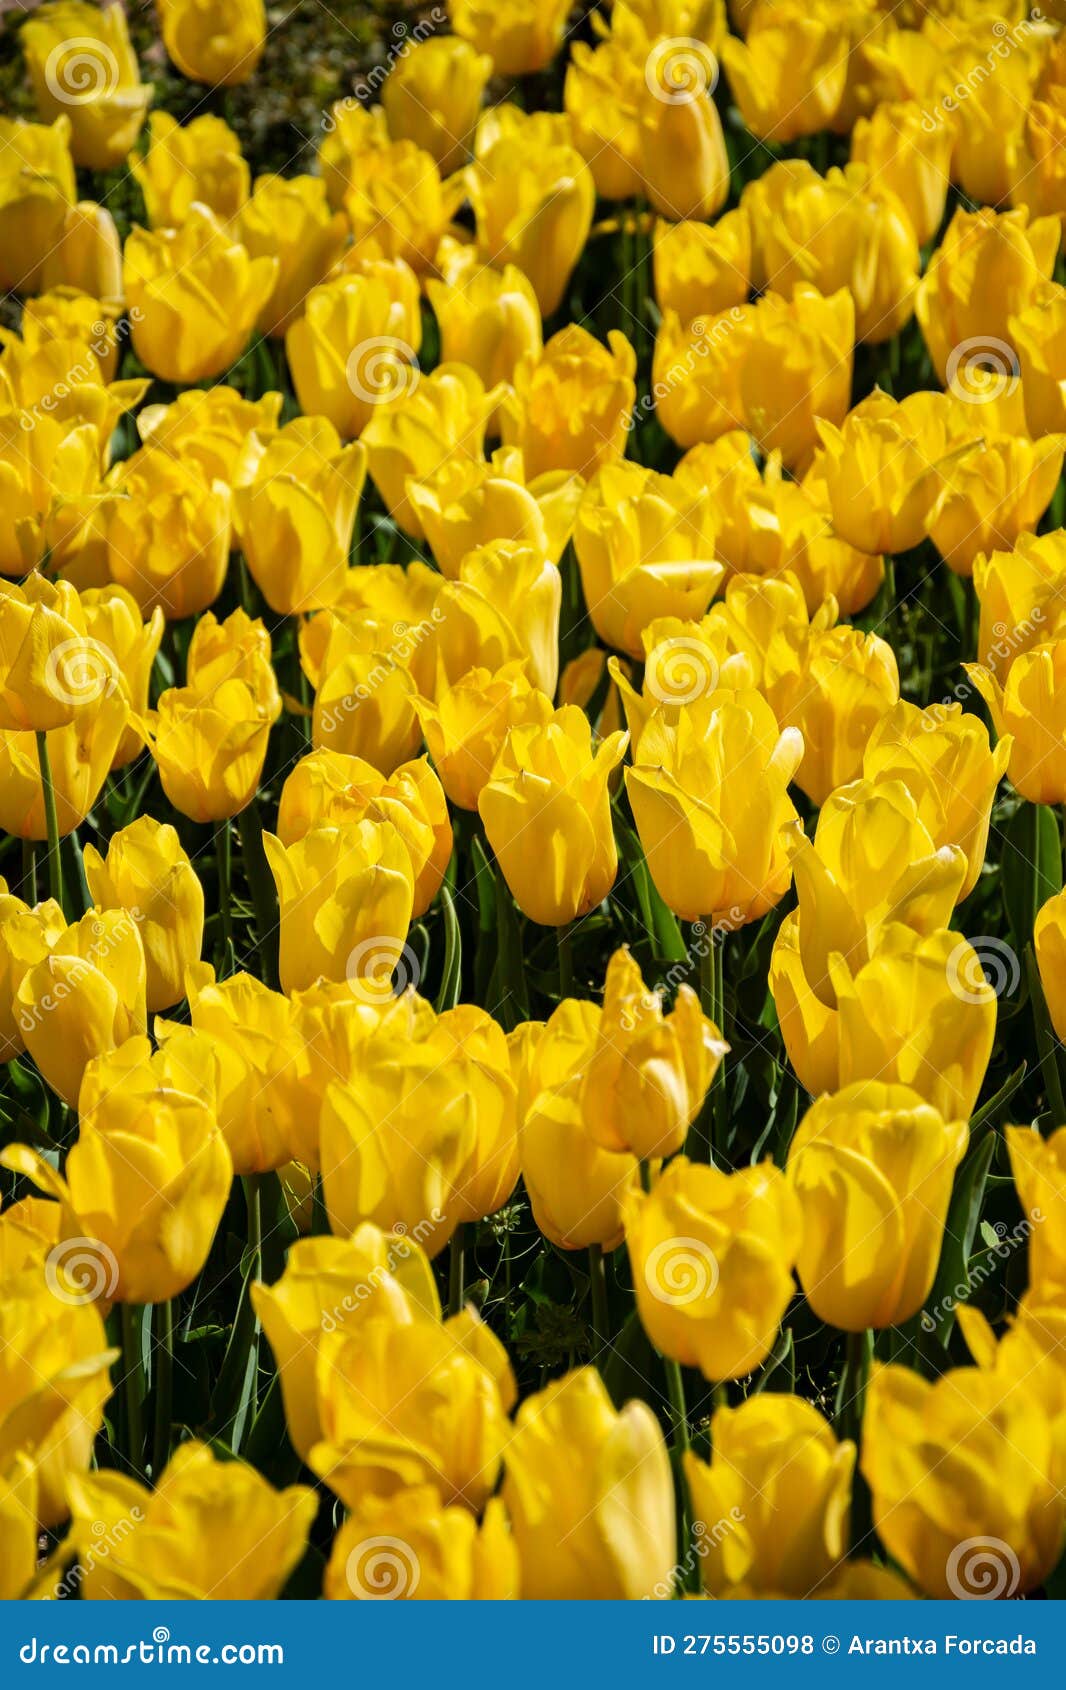 top view of yellow tulips in spring in the real jardin botanico